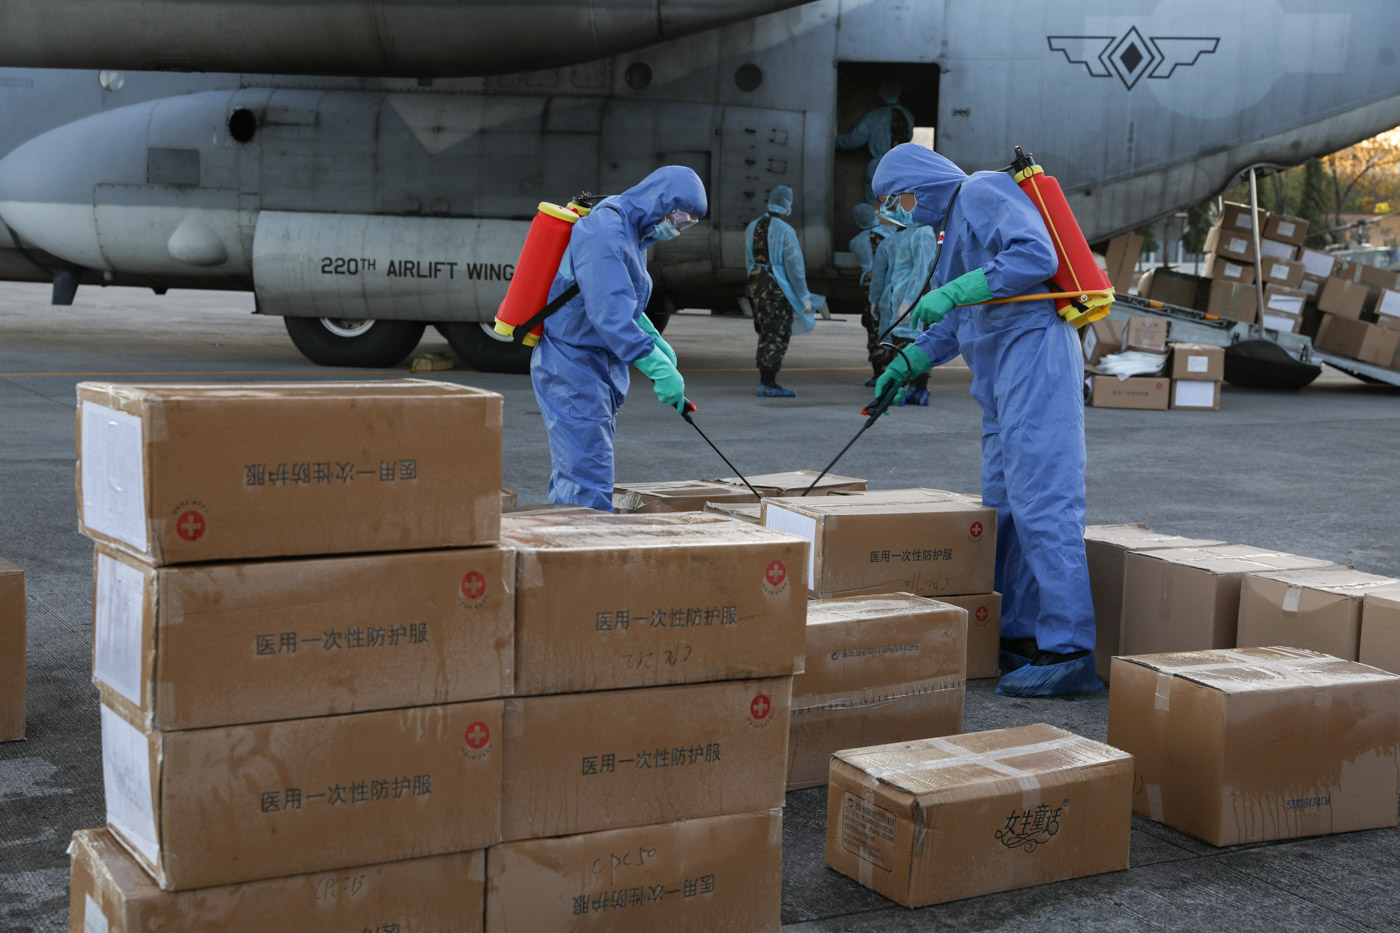 FILE PHOTO. The aid packages donated by the People's Republic of China undergo disinfection upon arrival at the Villamor Air Base in Pasay City on March 21, 2020. The donation includes assorted medical supplies, personal protective equipment, and testing kits for coronavirus. Malacañang photo 